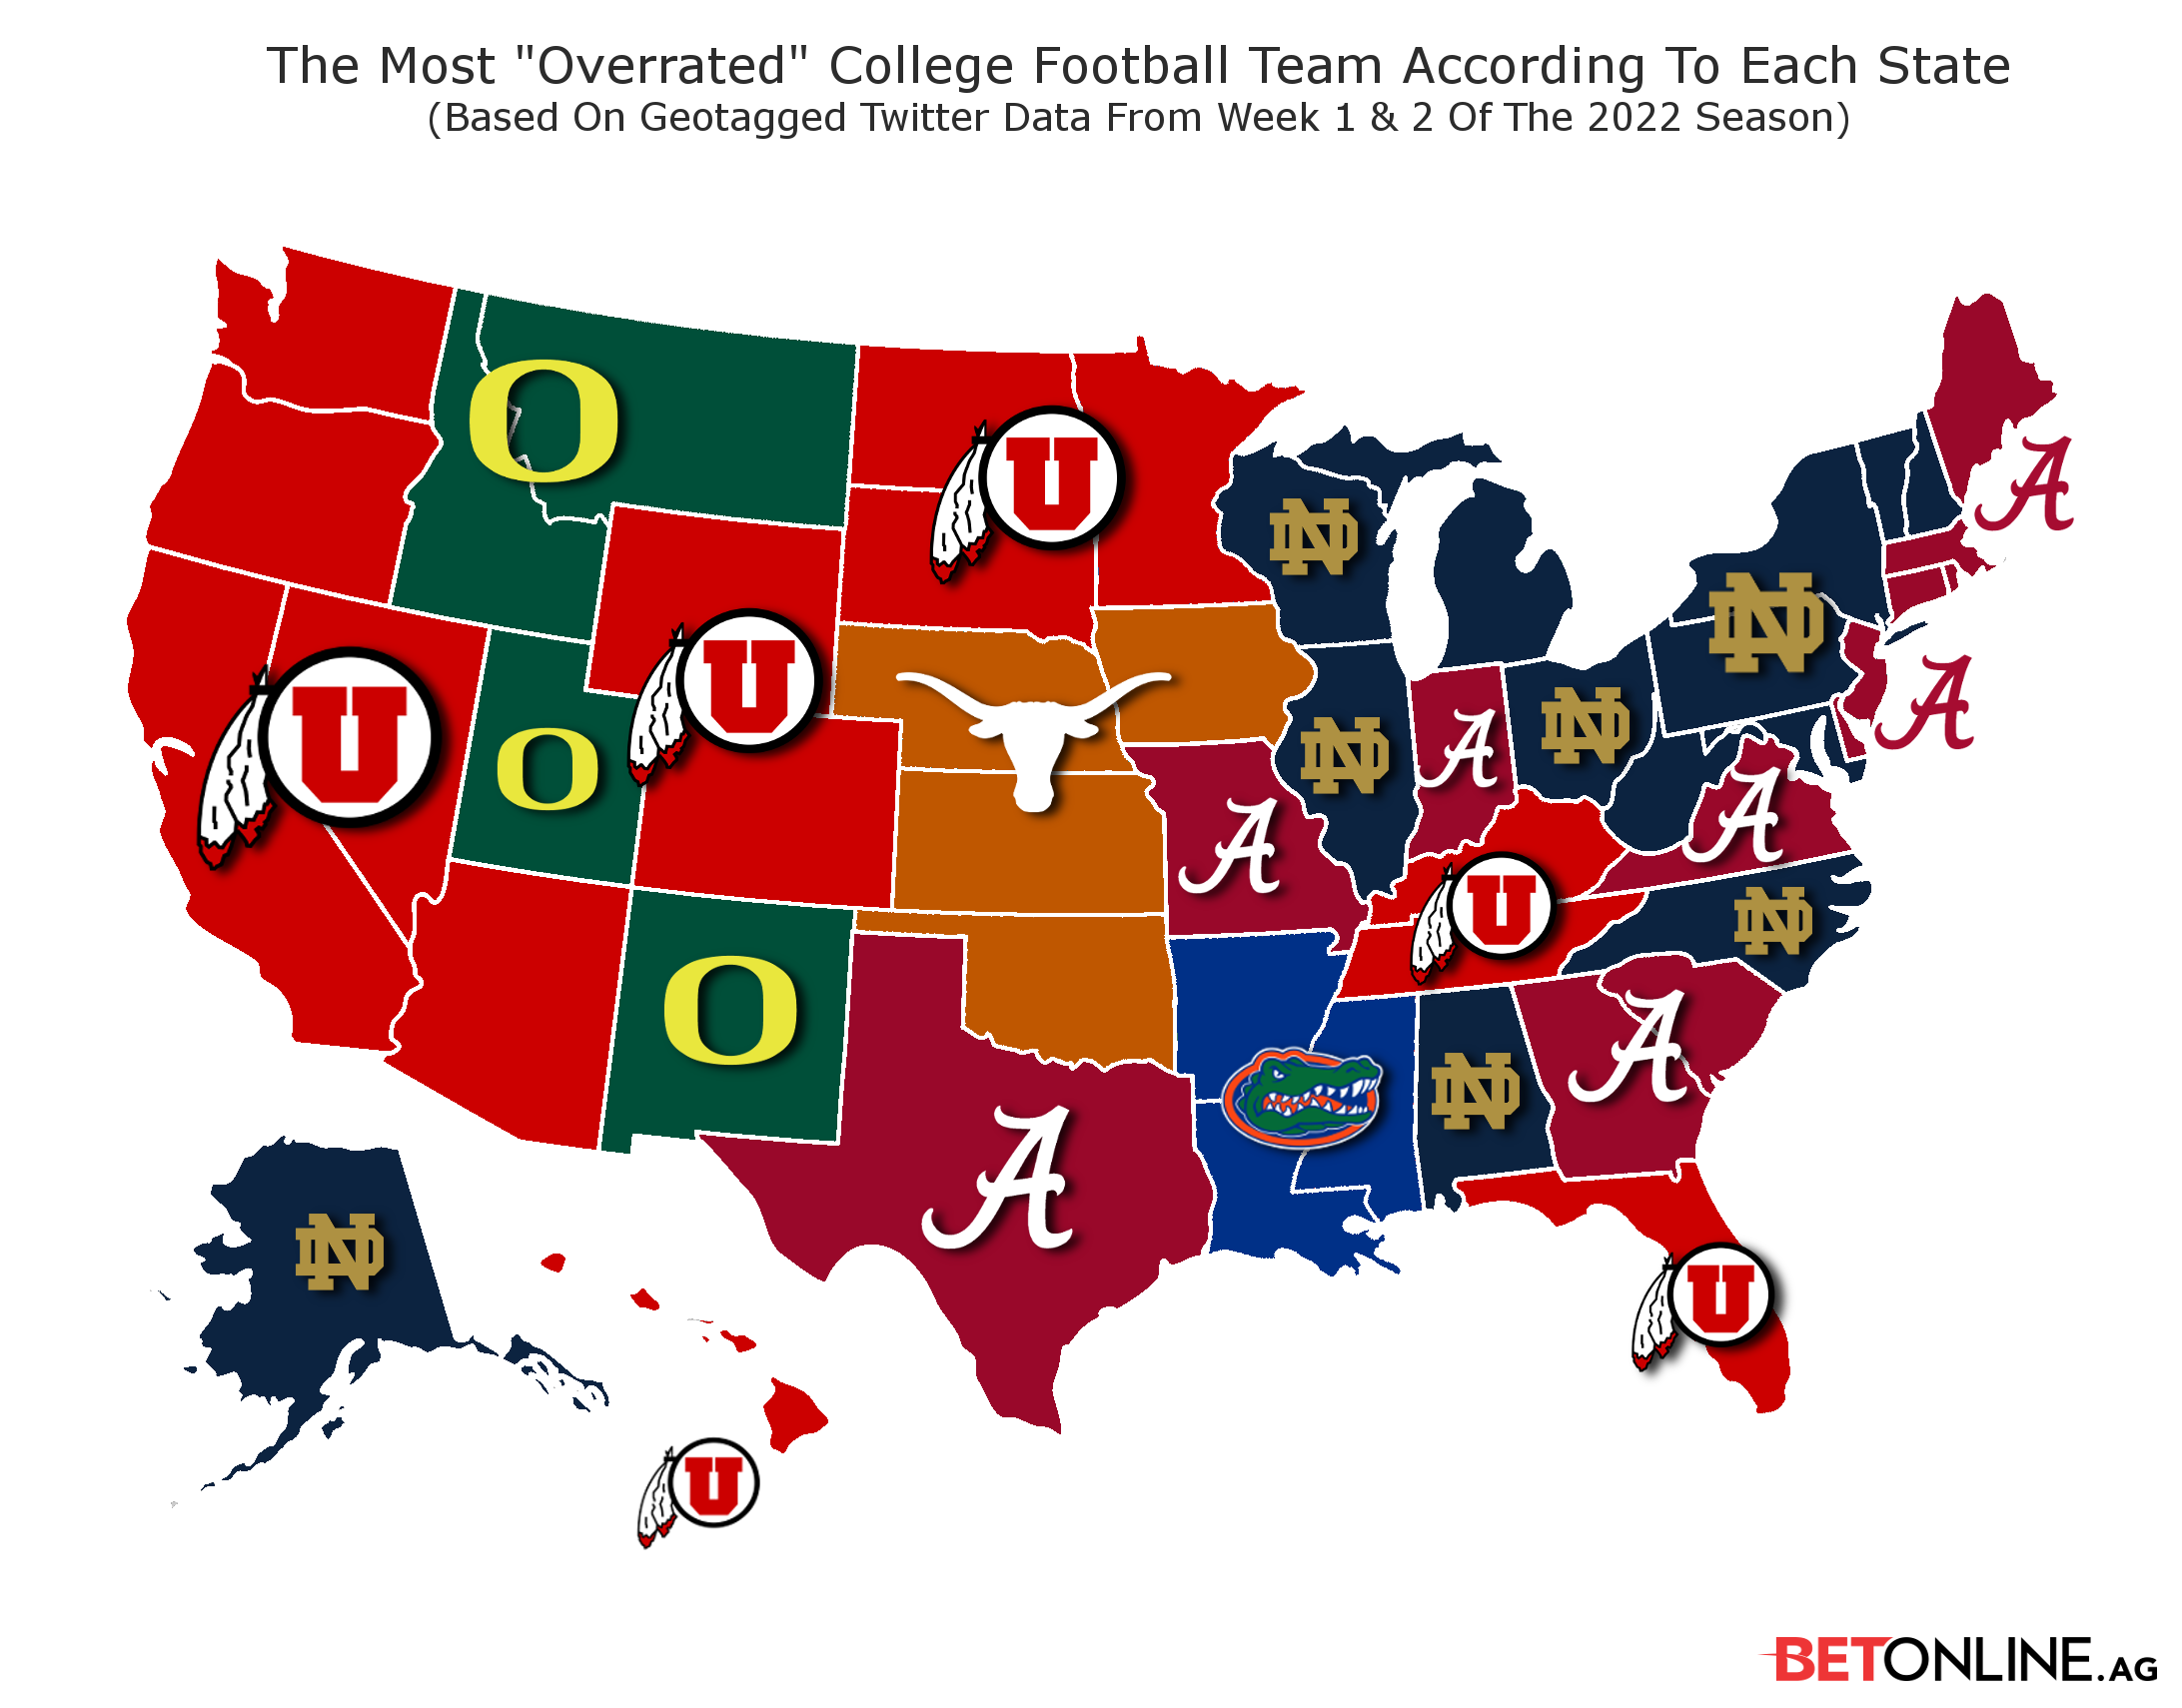 The Most Overrated College Football Team According to Twitter